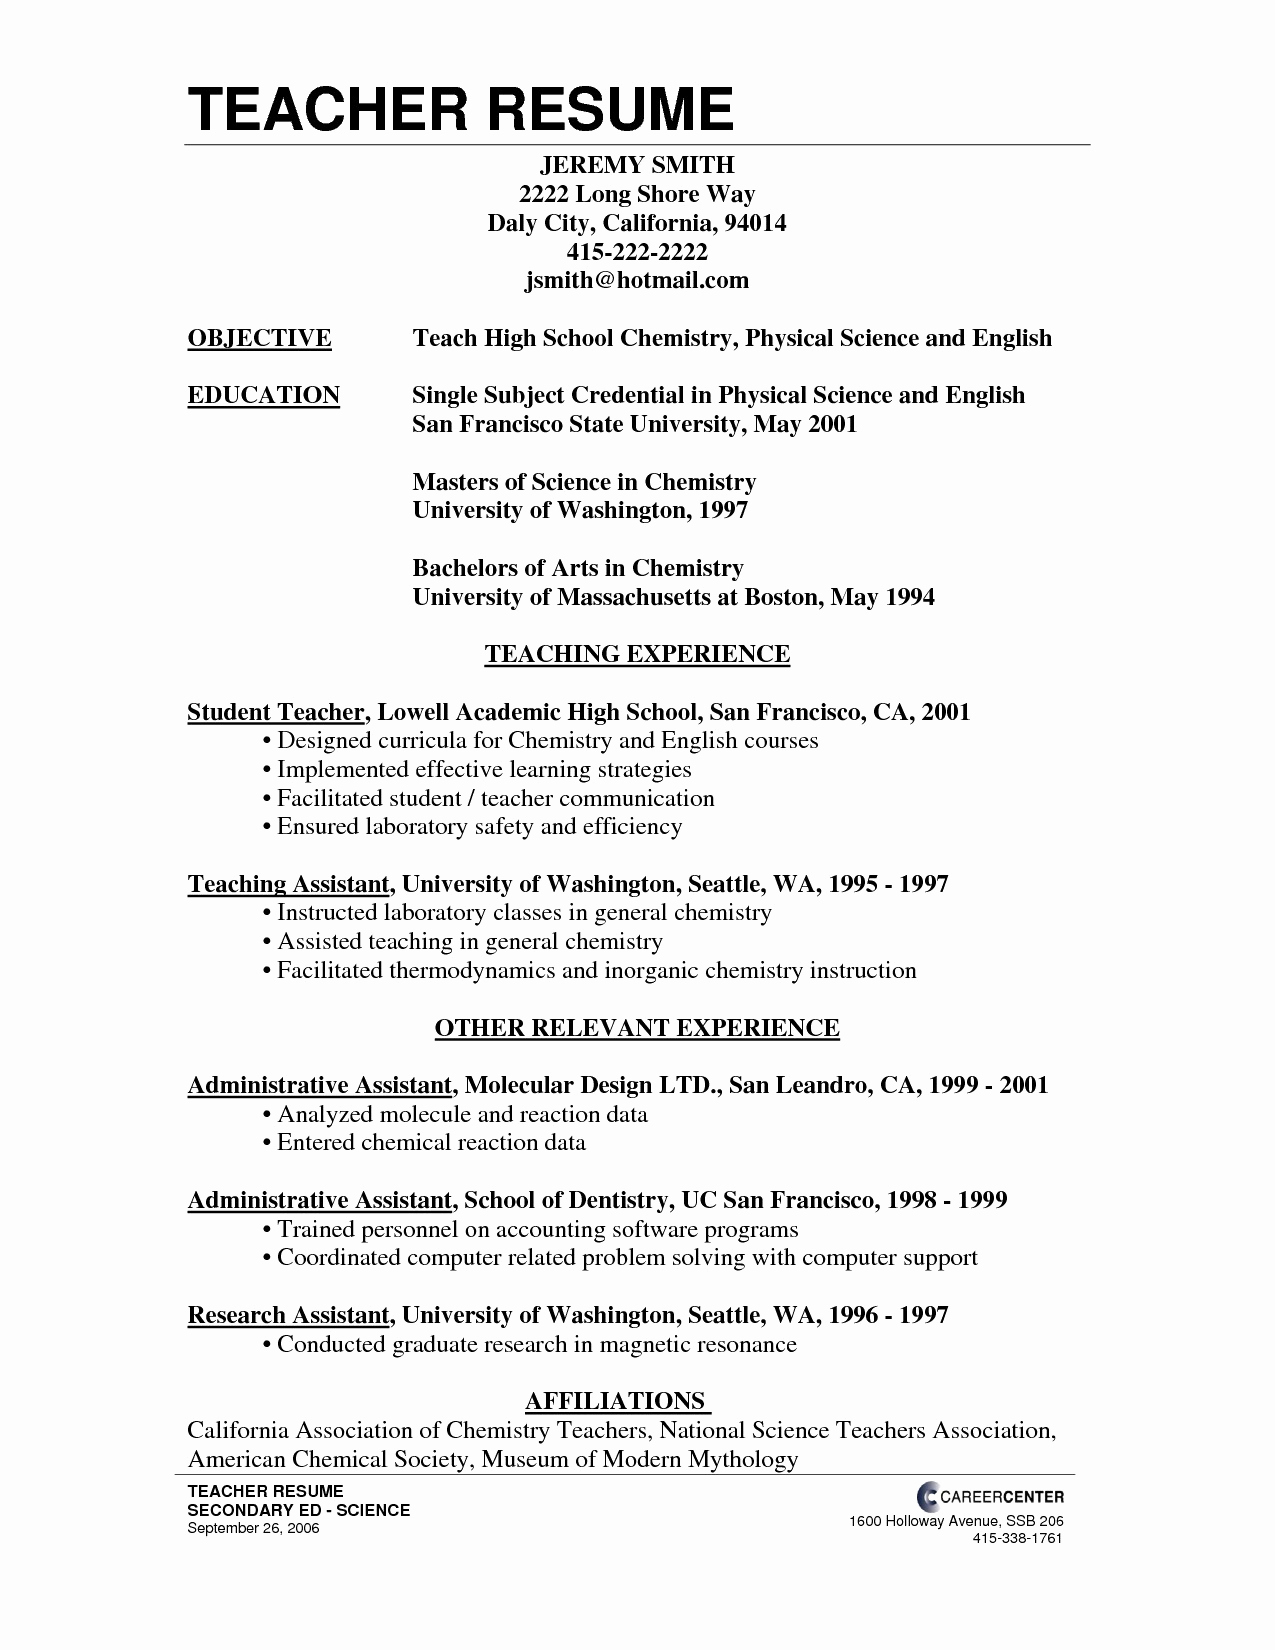 Free Sample Resume Cover Letter Template - Resume Cover Letter Example New Free Cover Letter Templates Examples